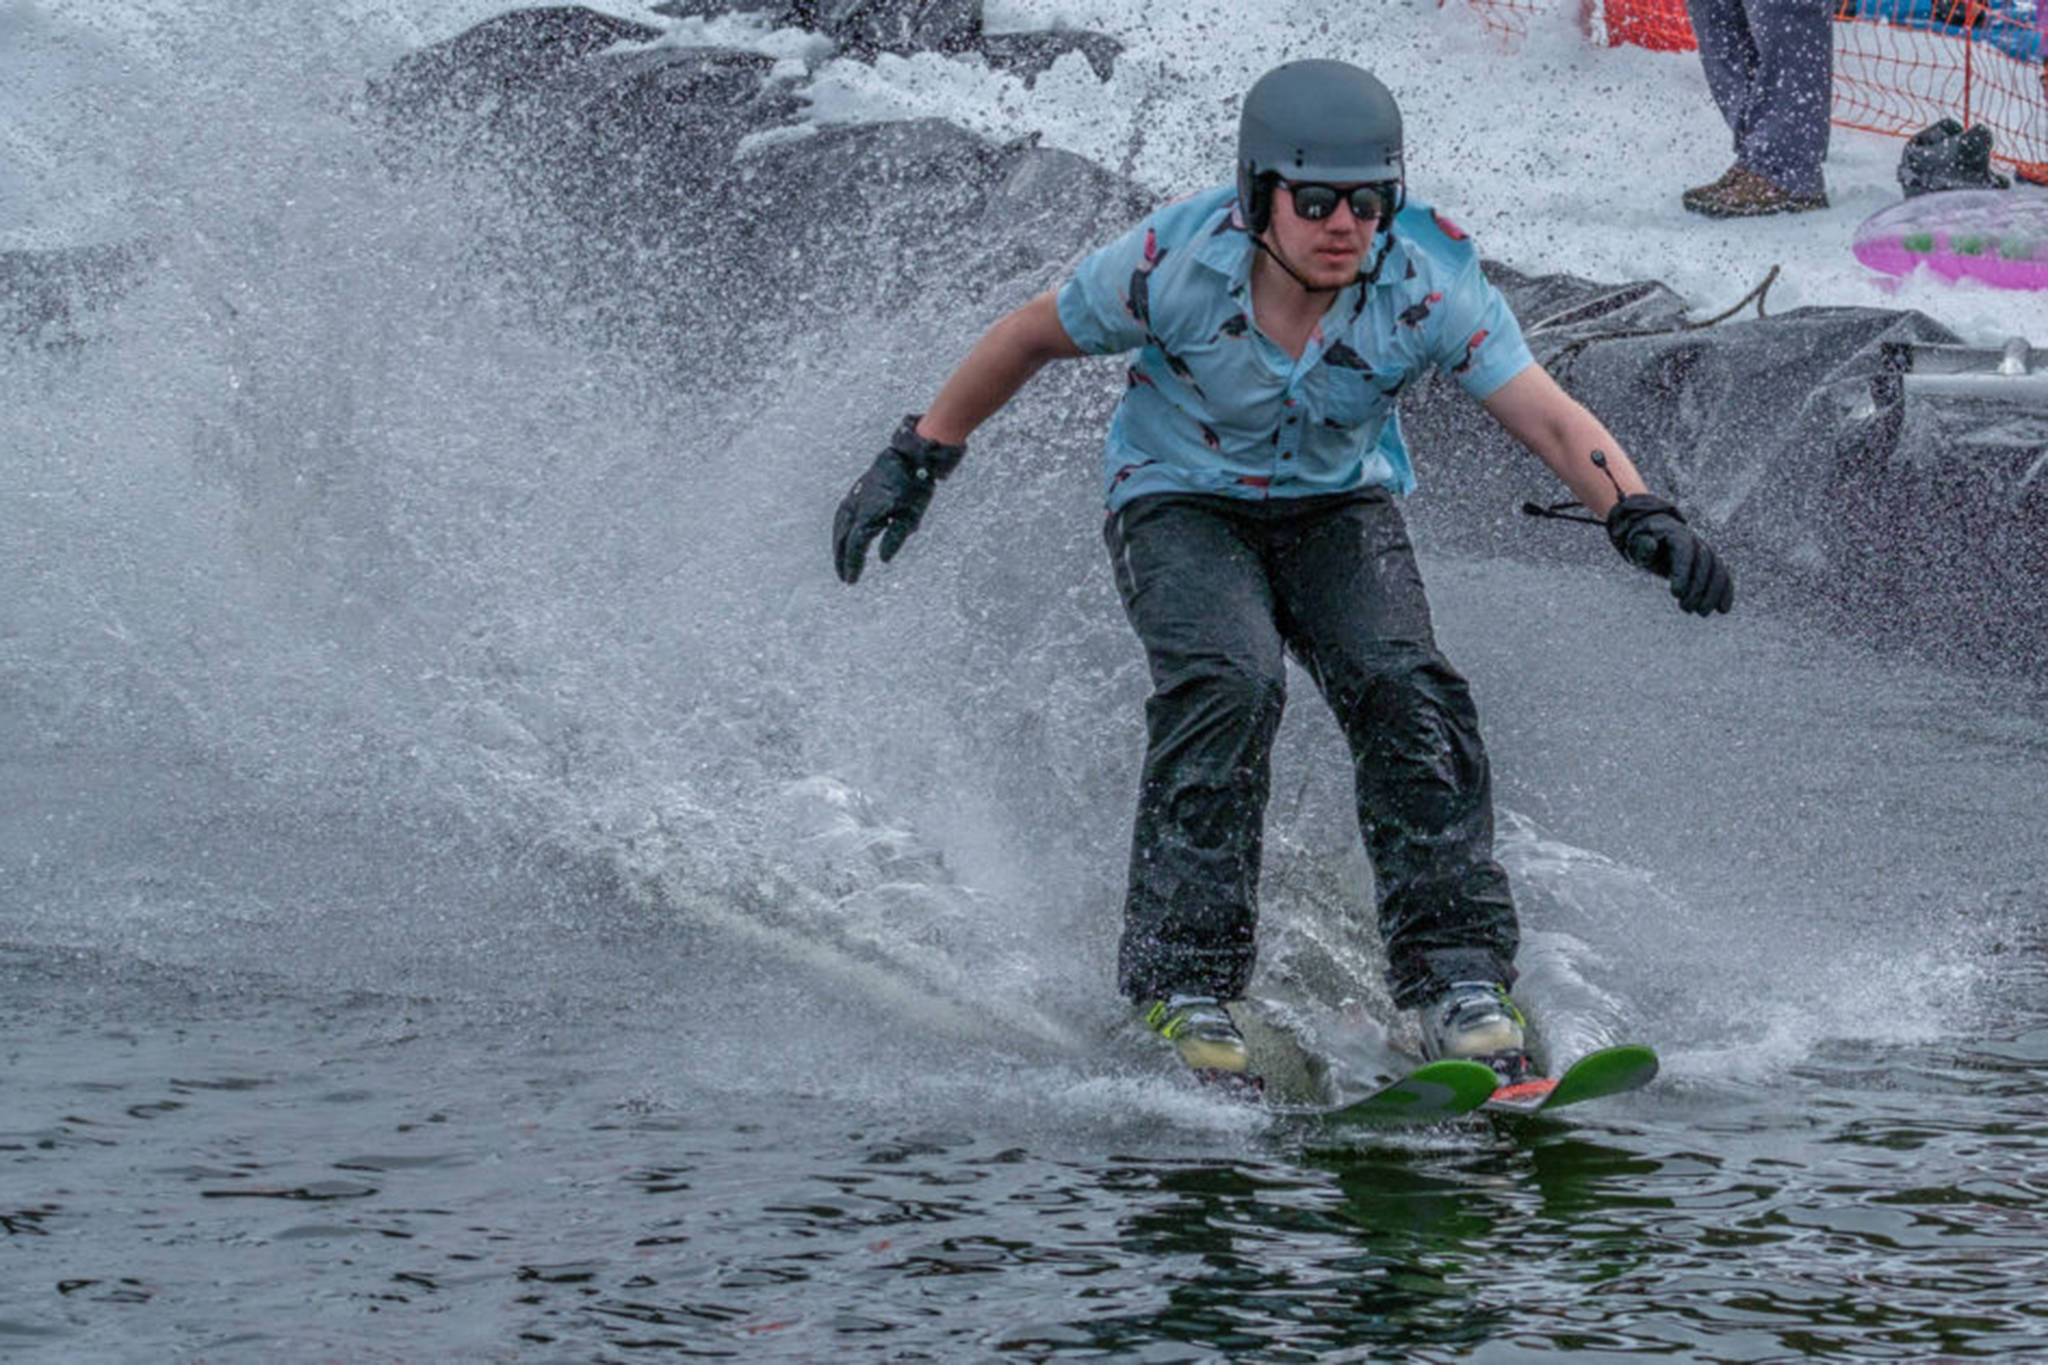 New event fills in for canceled Slush Cup